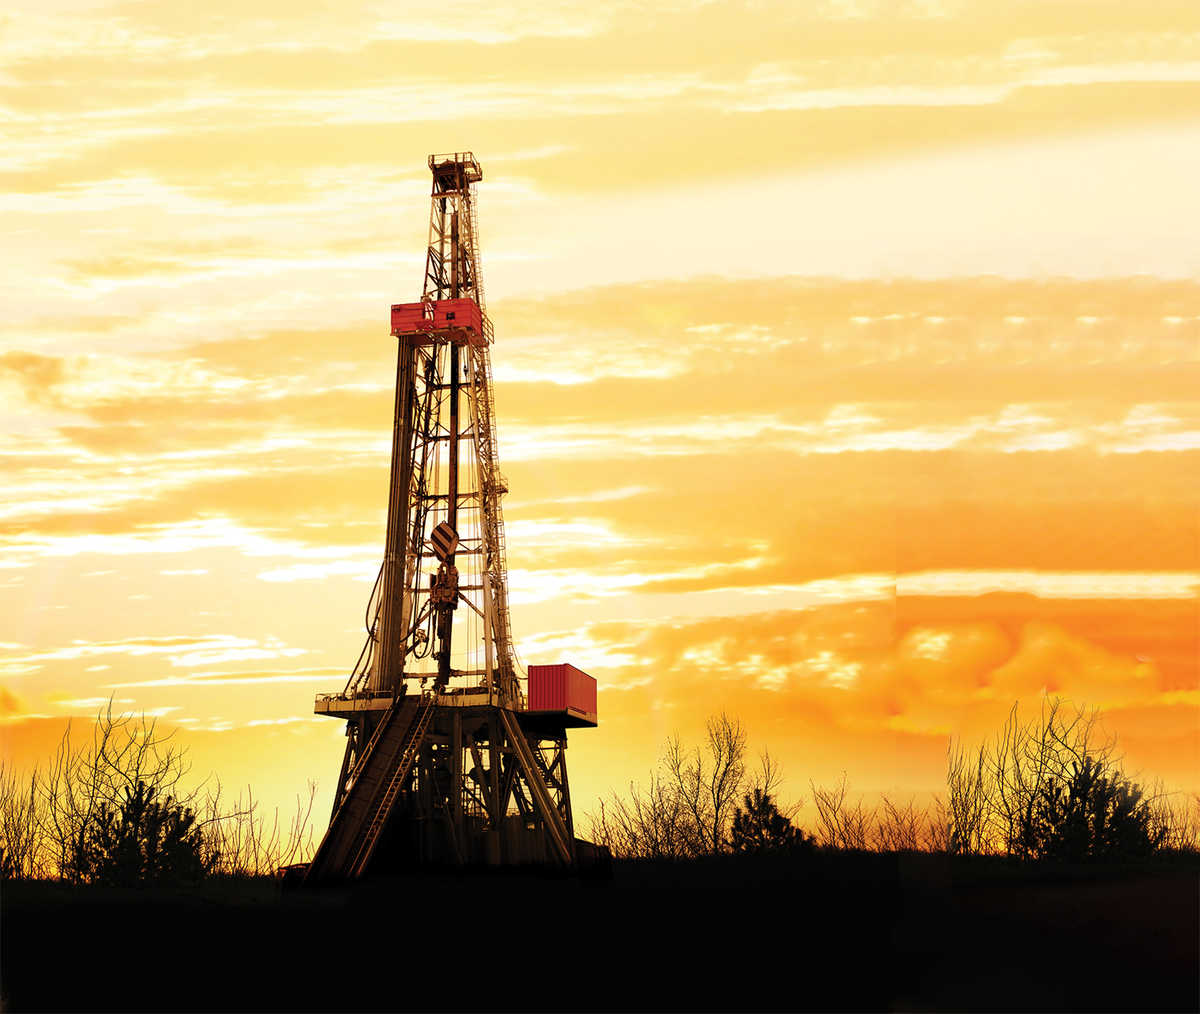 oil well at sunset